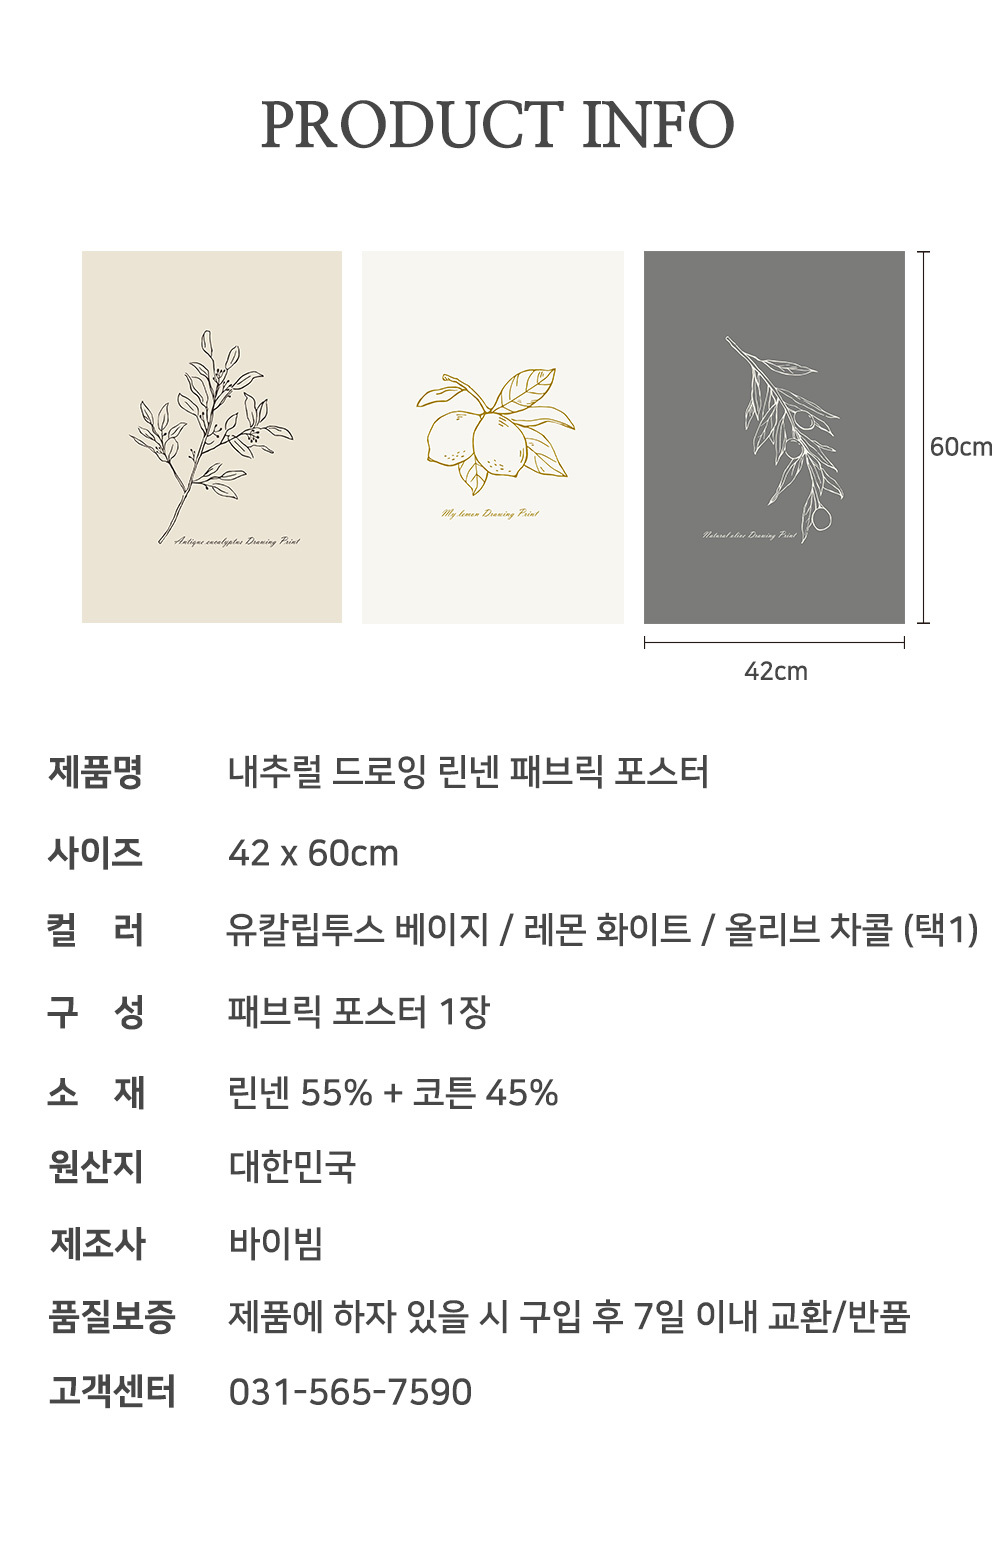 buybeam natural drawing linen fabric poster 3type 제품상세정보